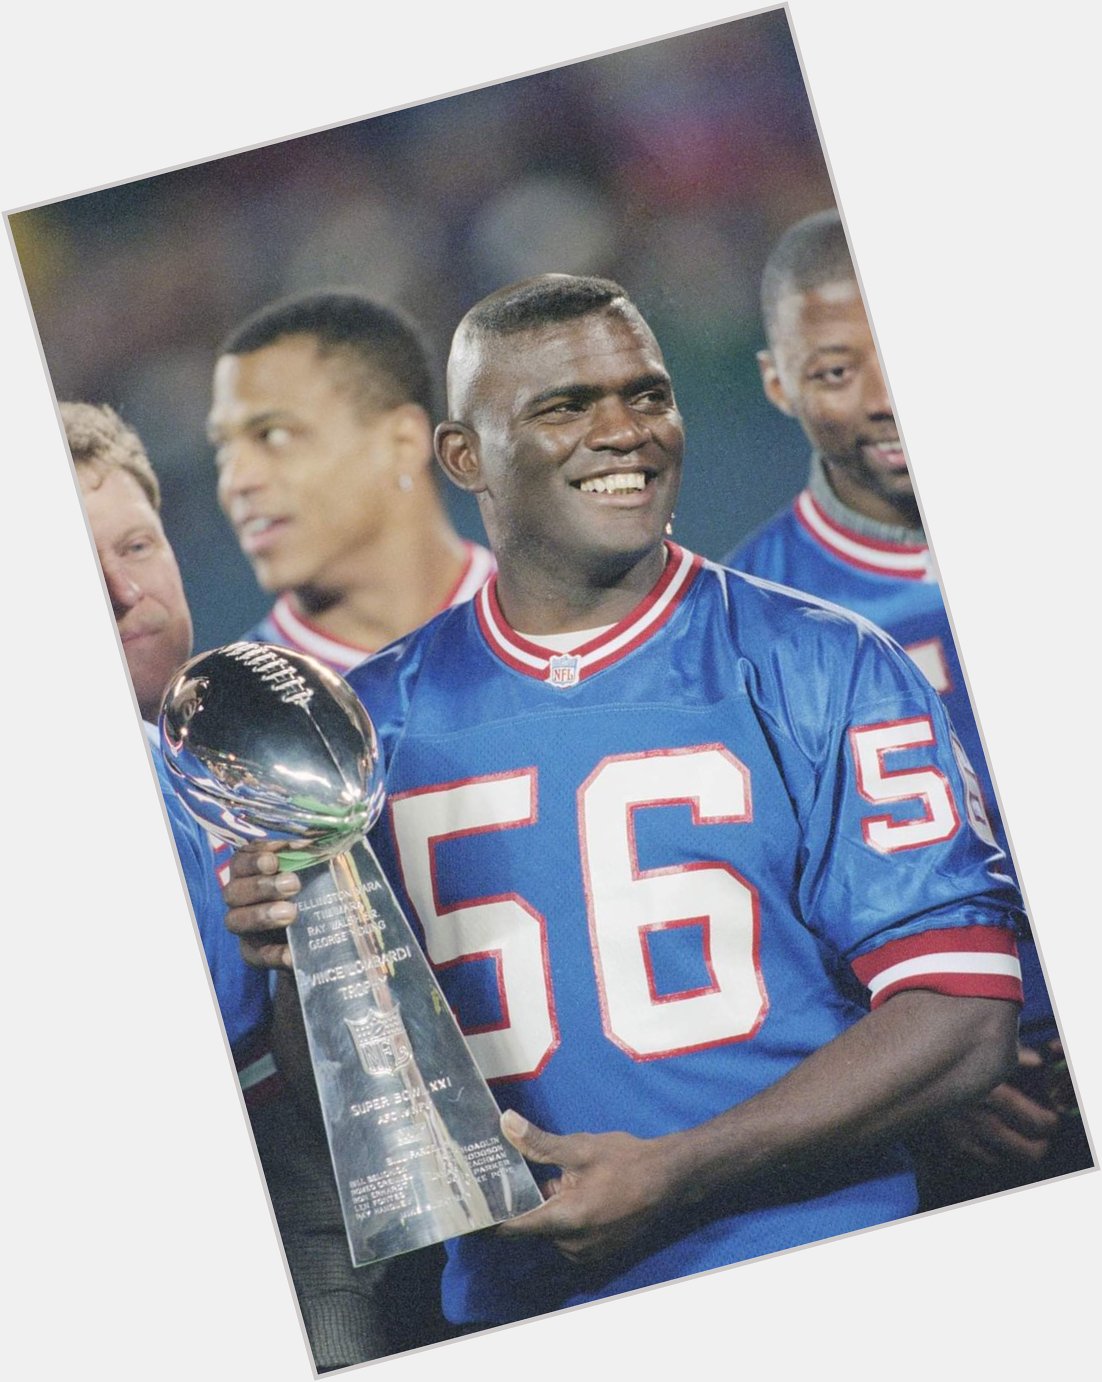 Happy Birthday to one of the greatest players in history, Lawrence Taylor! 